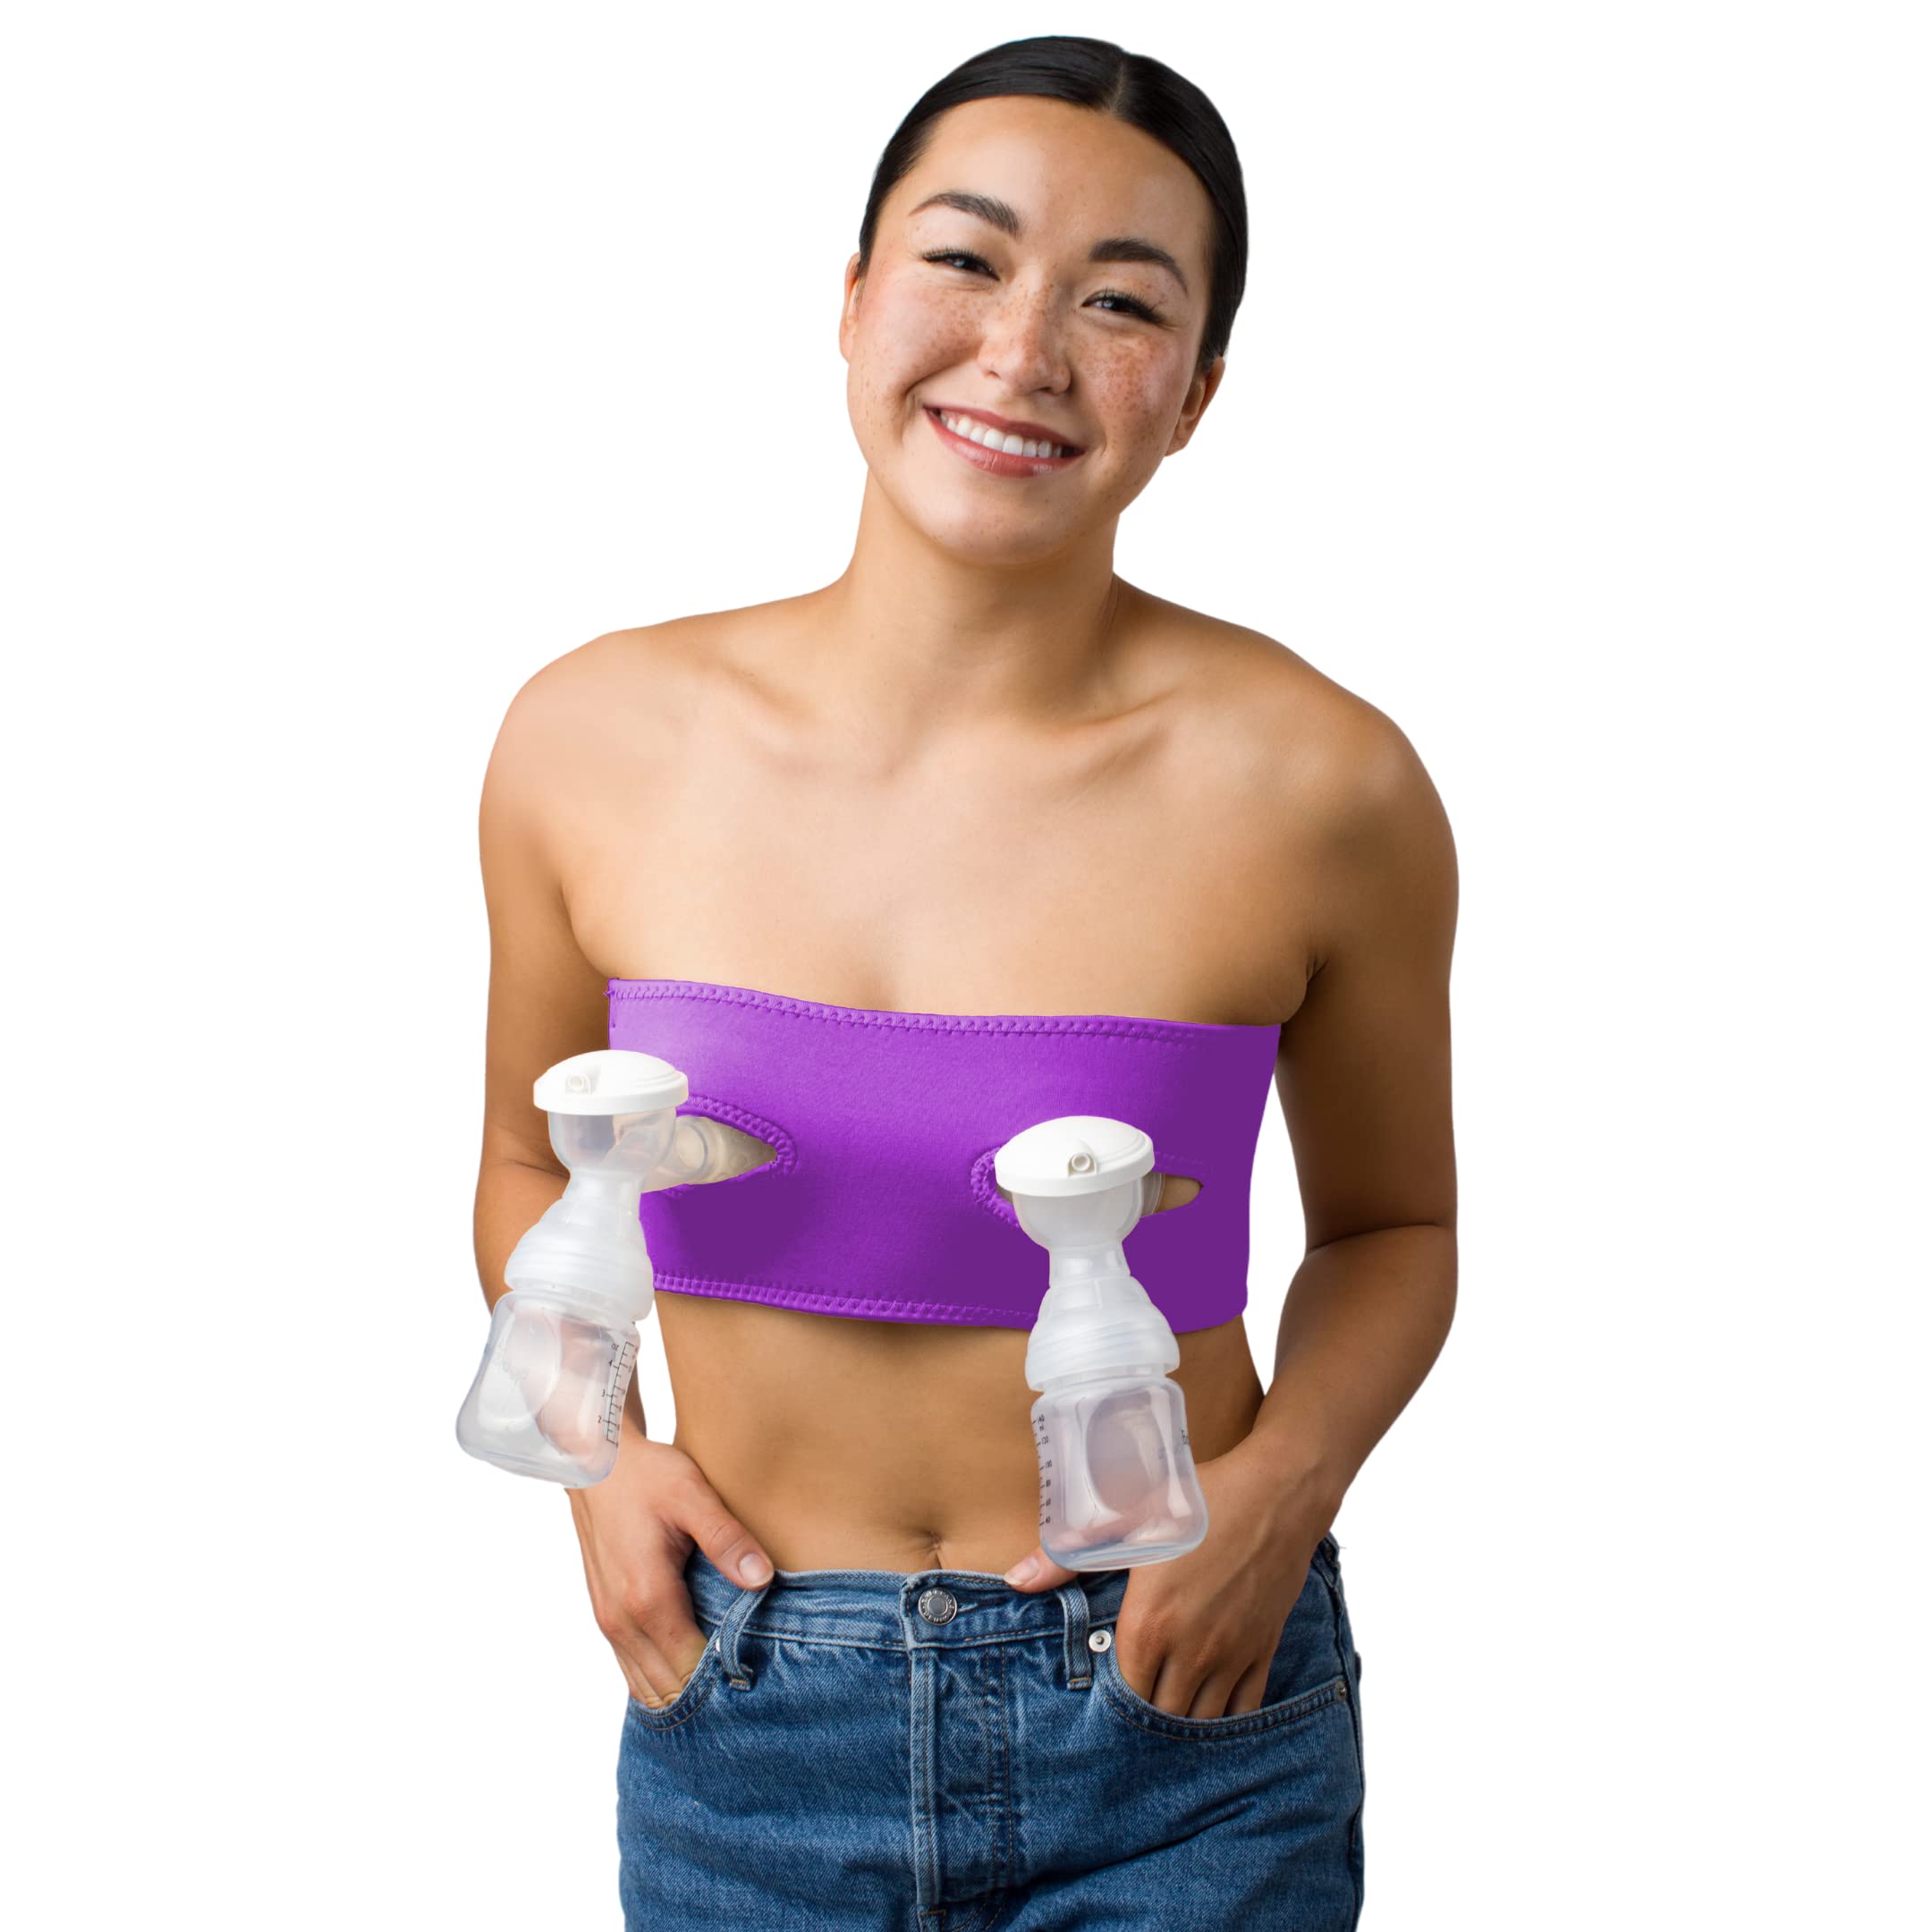 LaVie The 3-in-1 Warming Lactation Massager Bundle with Pumping Bra for Handsfree Breastfeeding, Nursing or Pumping, Essential Support for Clogged Ducts, Mastitis, and Engorgement